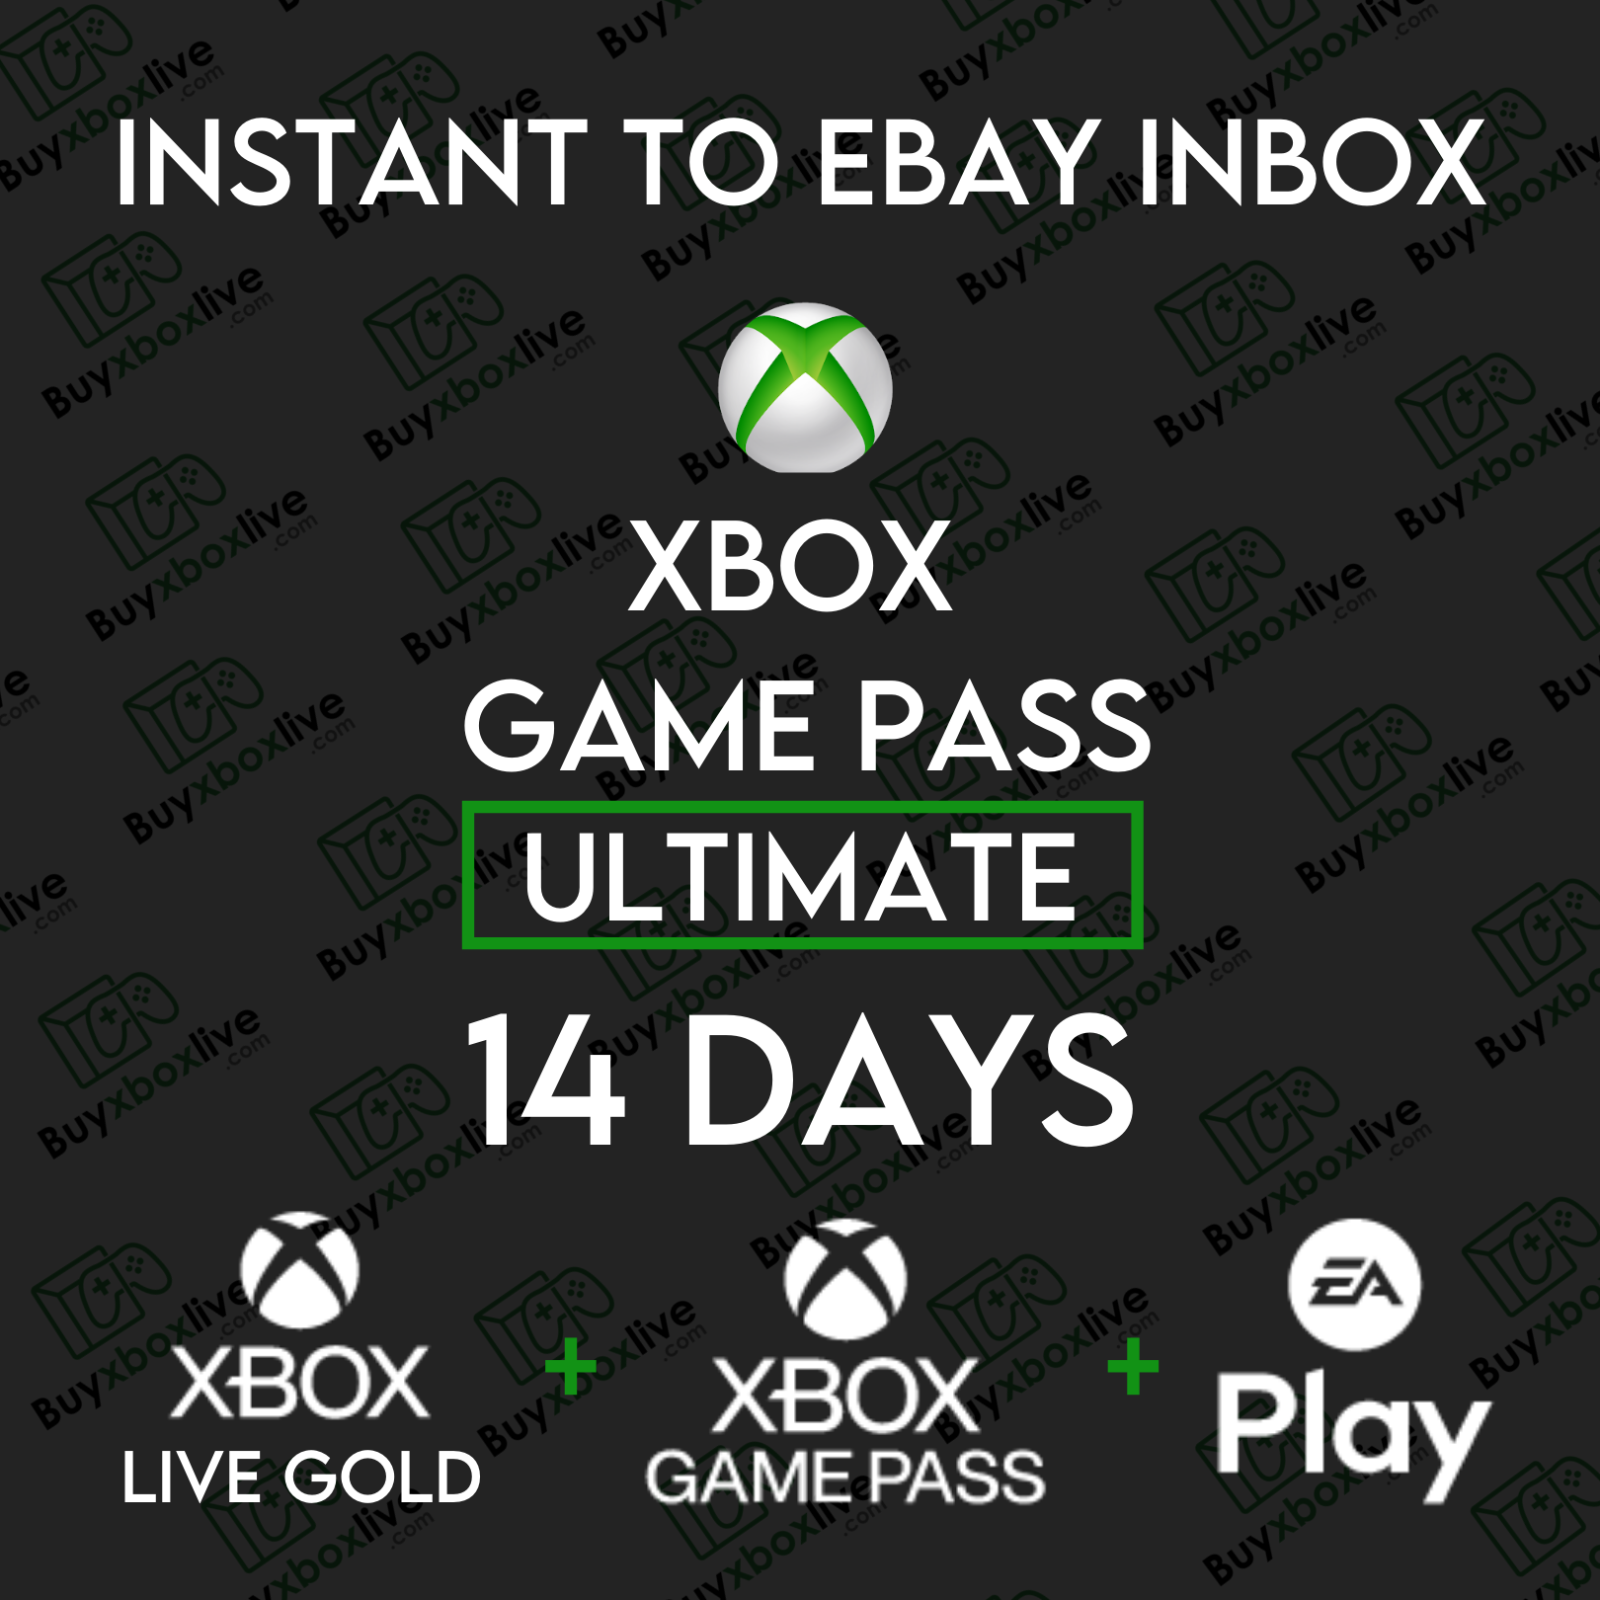 14 Day Xbox Game Pass Ultimate + Xbox Live Gold + Ea Access | Instant 24/7 365